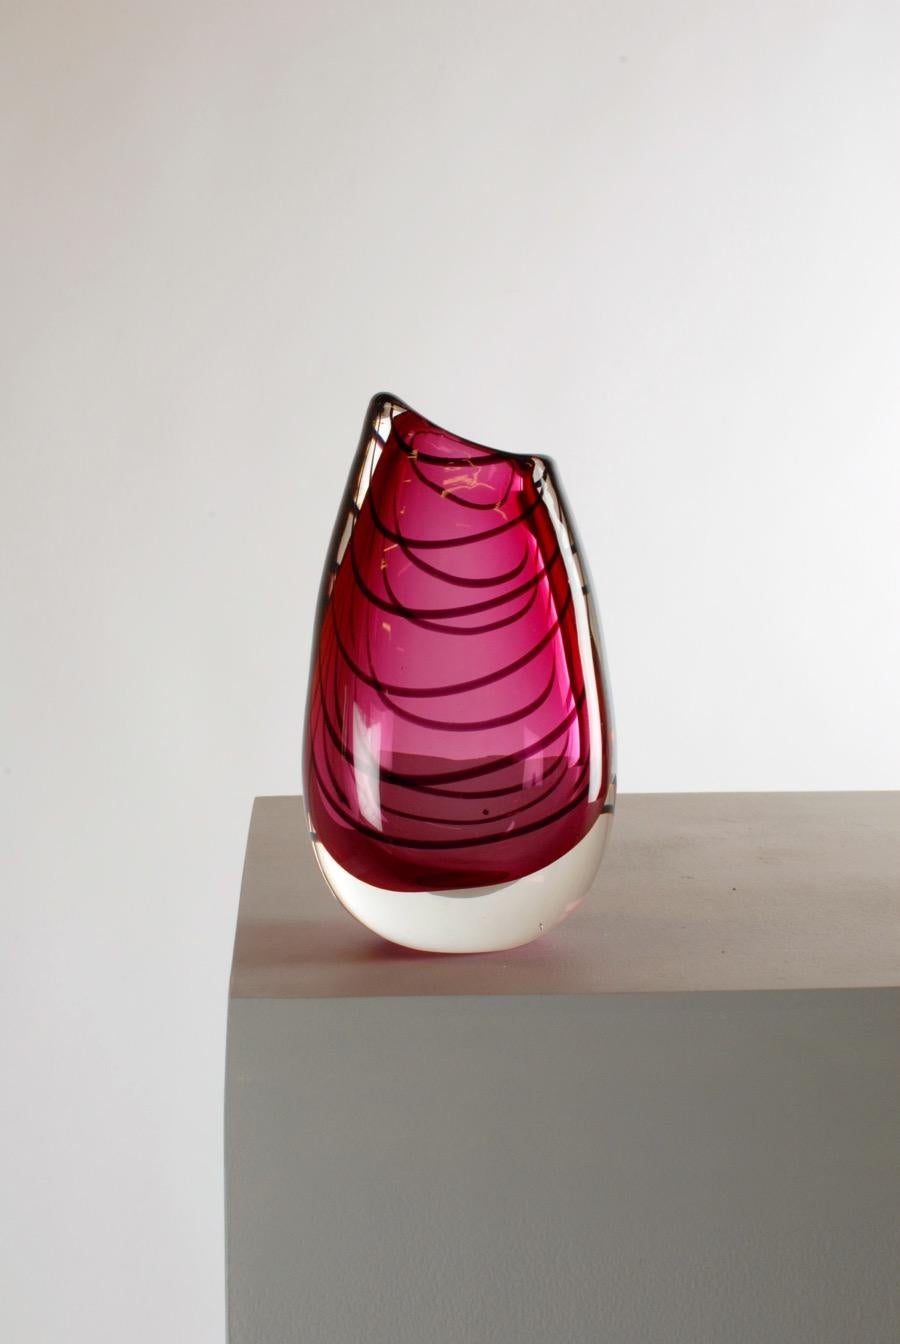 Midcentury Modern Scandinavian glass vase manufactured by Magnor Norway.
Small production rare vase serie by the renknown Norwegian manufacture.
Two colored Pinkish red ground color with black brown thread like detail and clear base,
circa